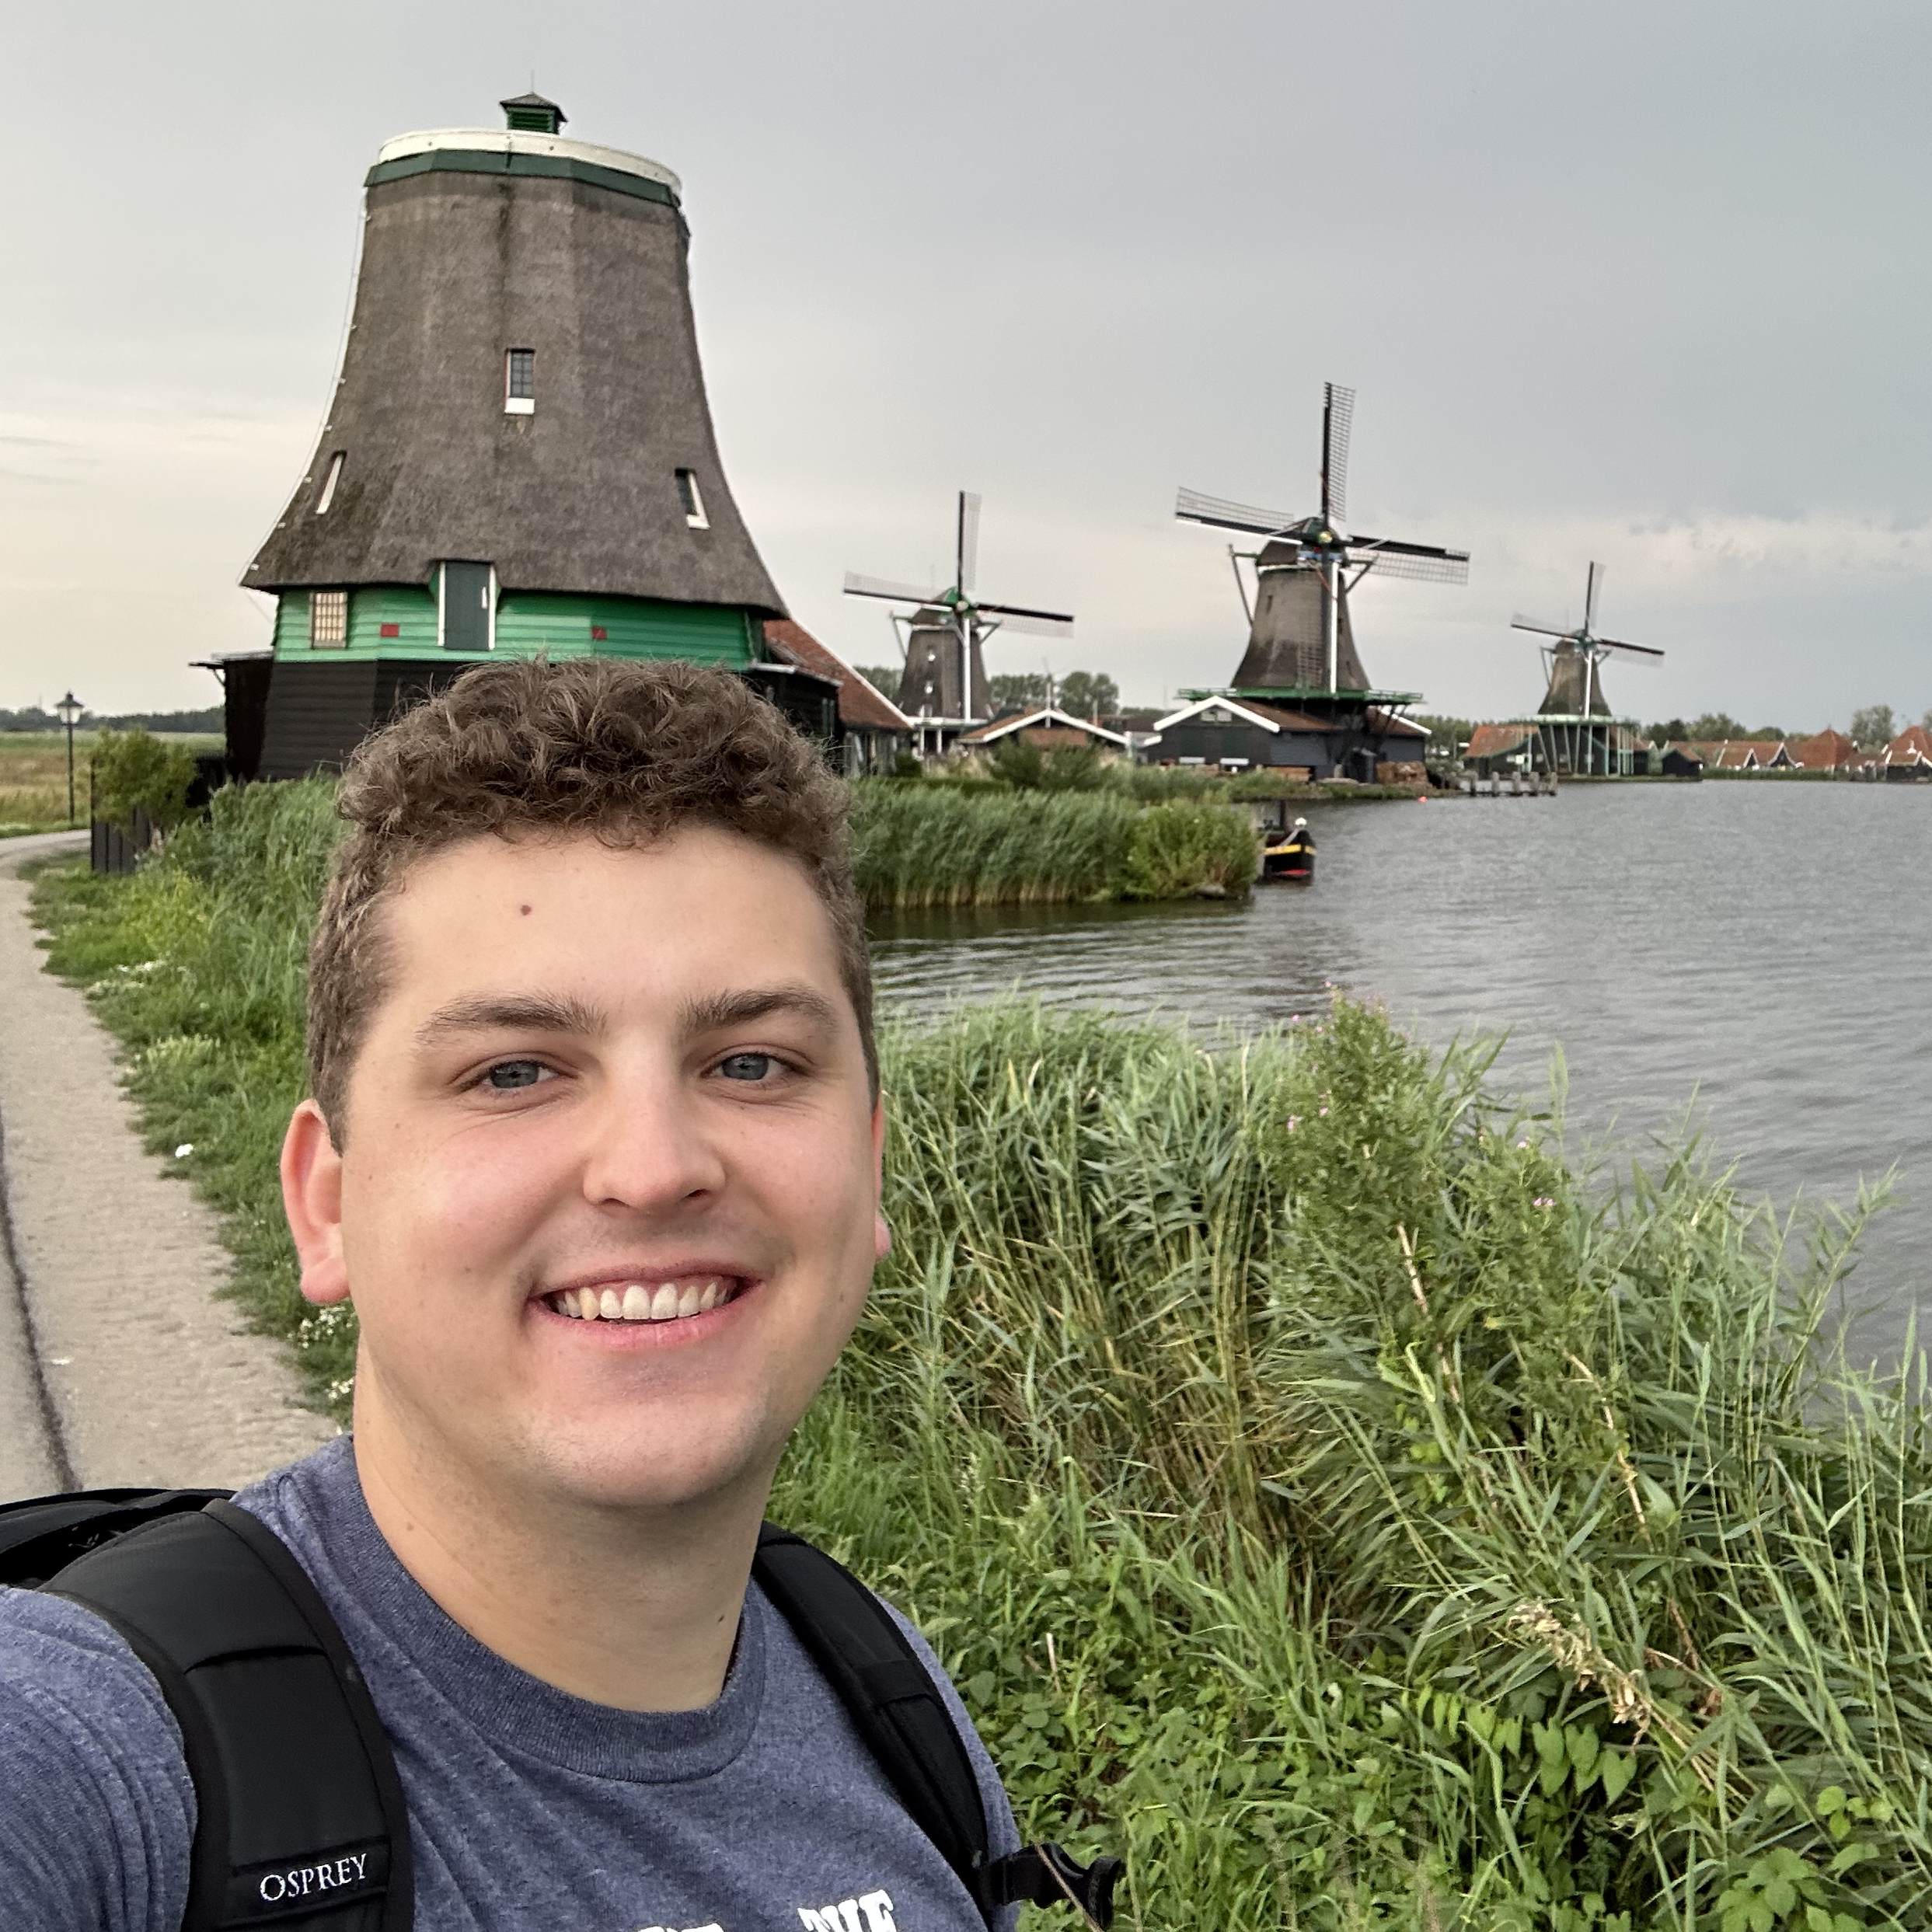 Me in front of Dutch Windmills!